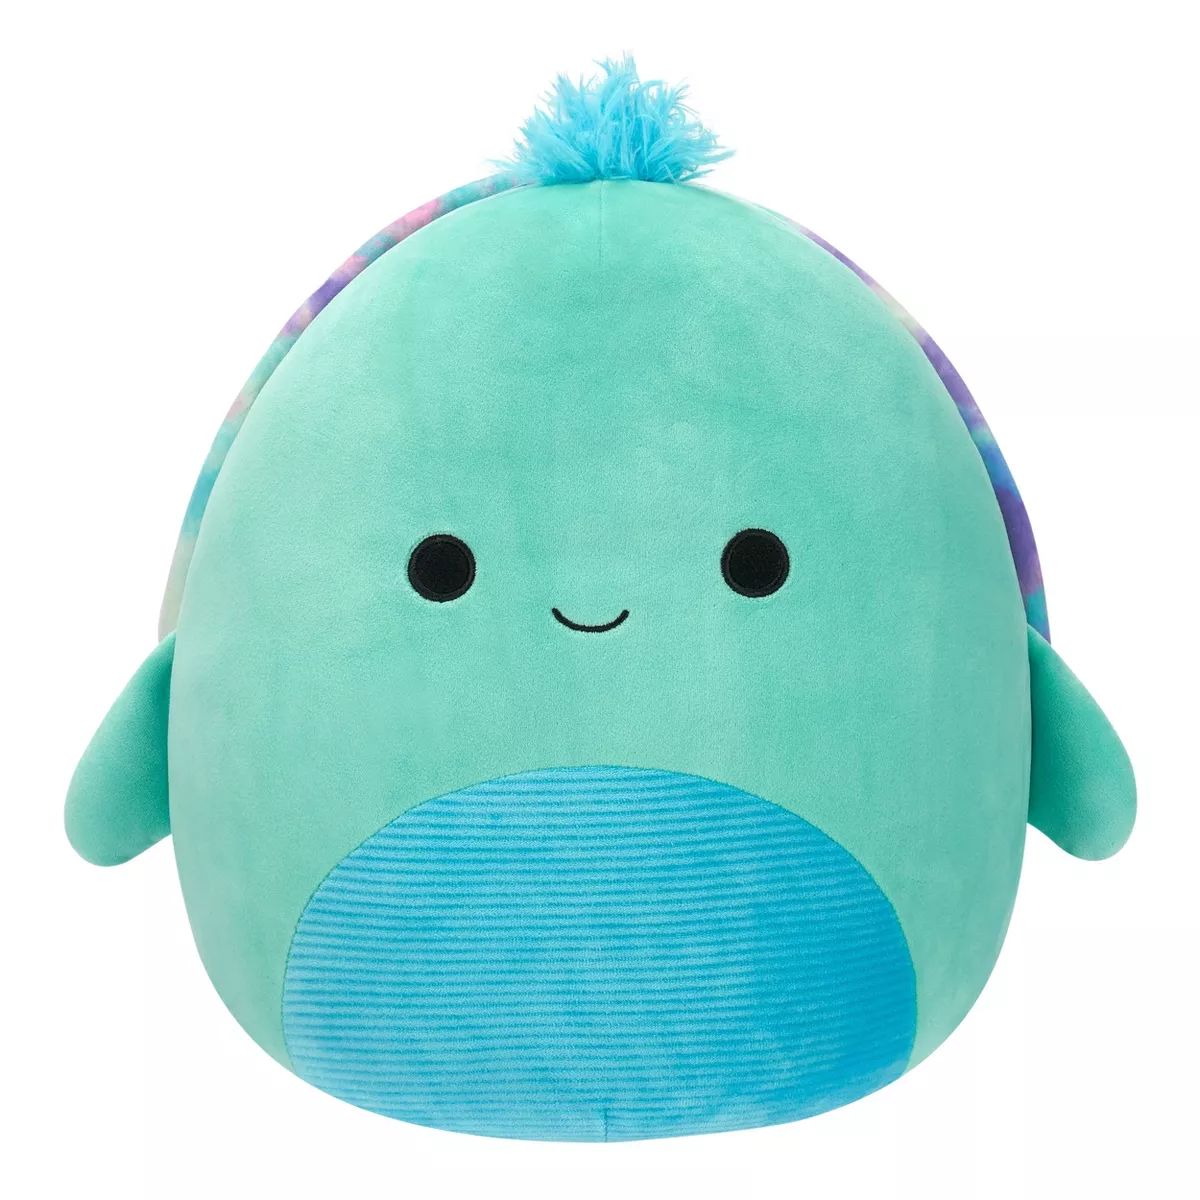 Squishmallows 12" Cascade Teal Turtle with Tie Dye Shell | Target